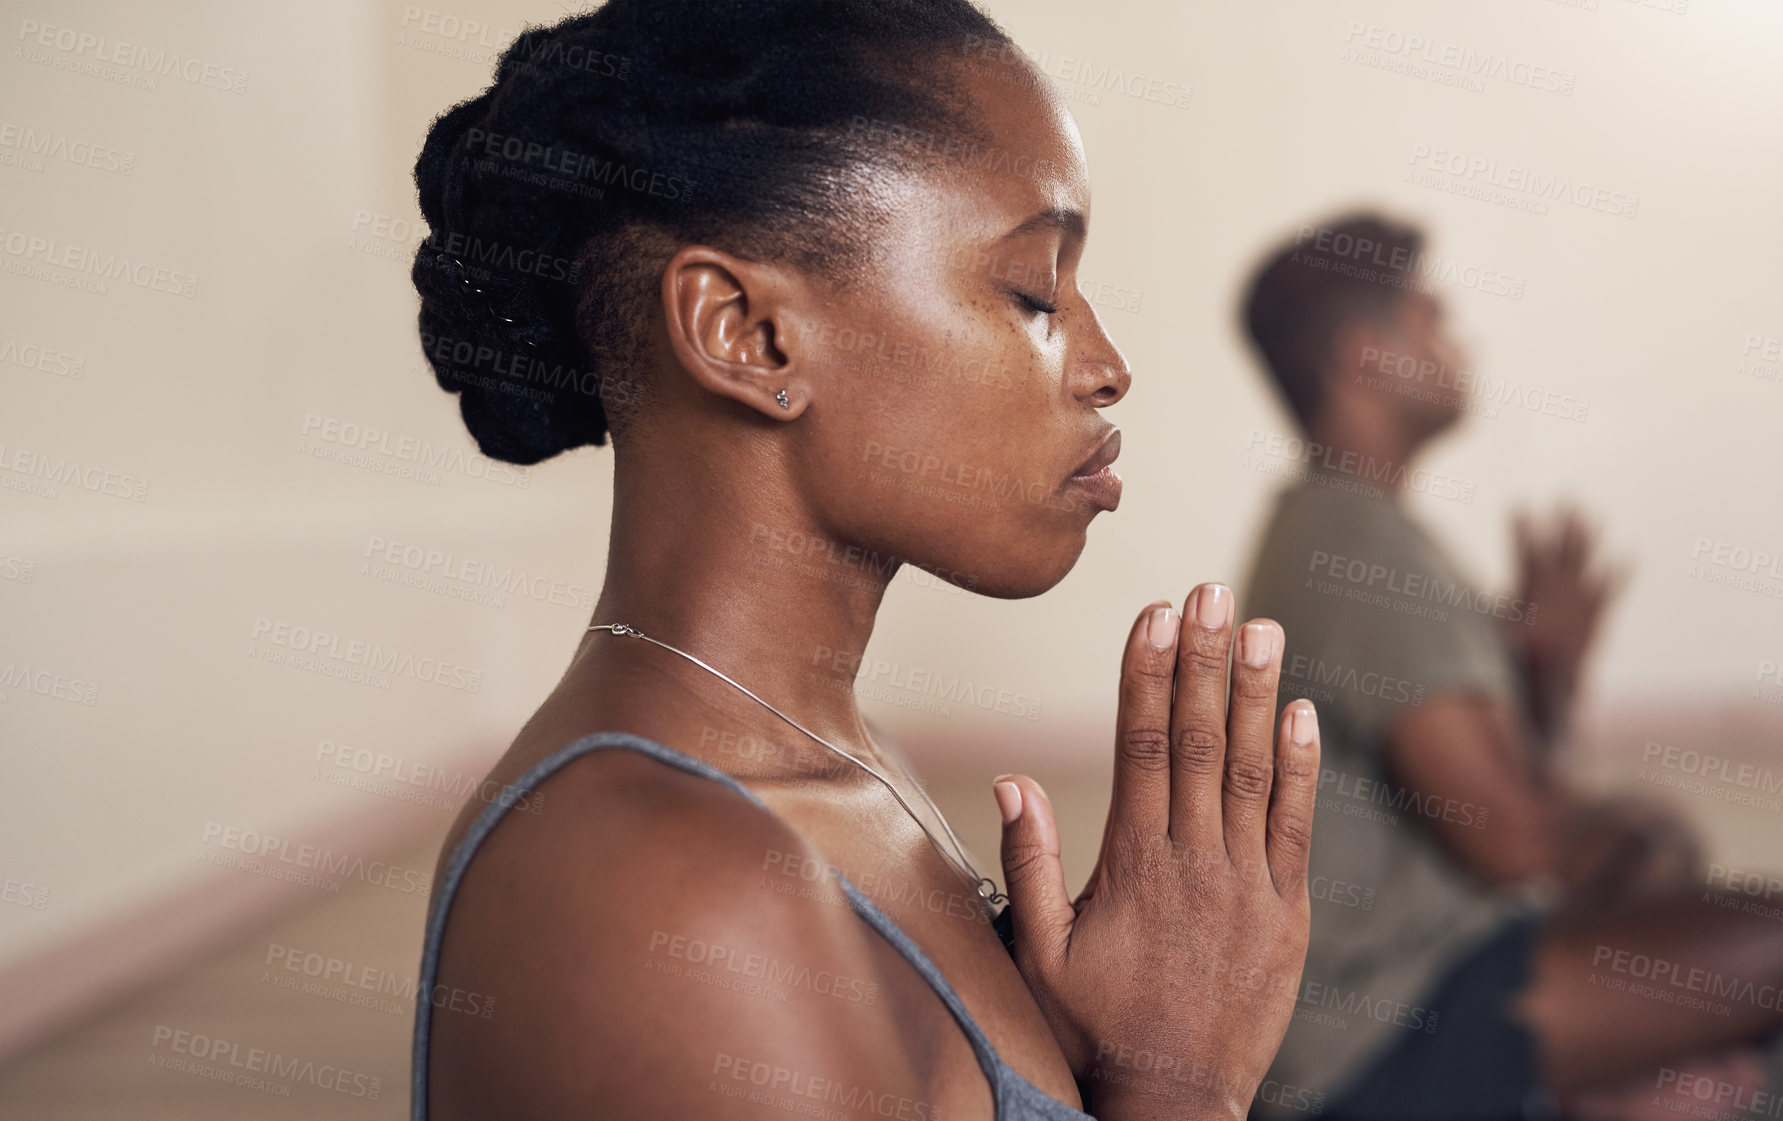 Buy stock photo Shot of an attractive young woman meditating in a yoga class